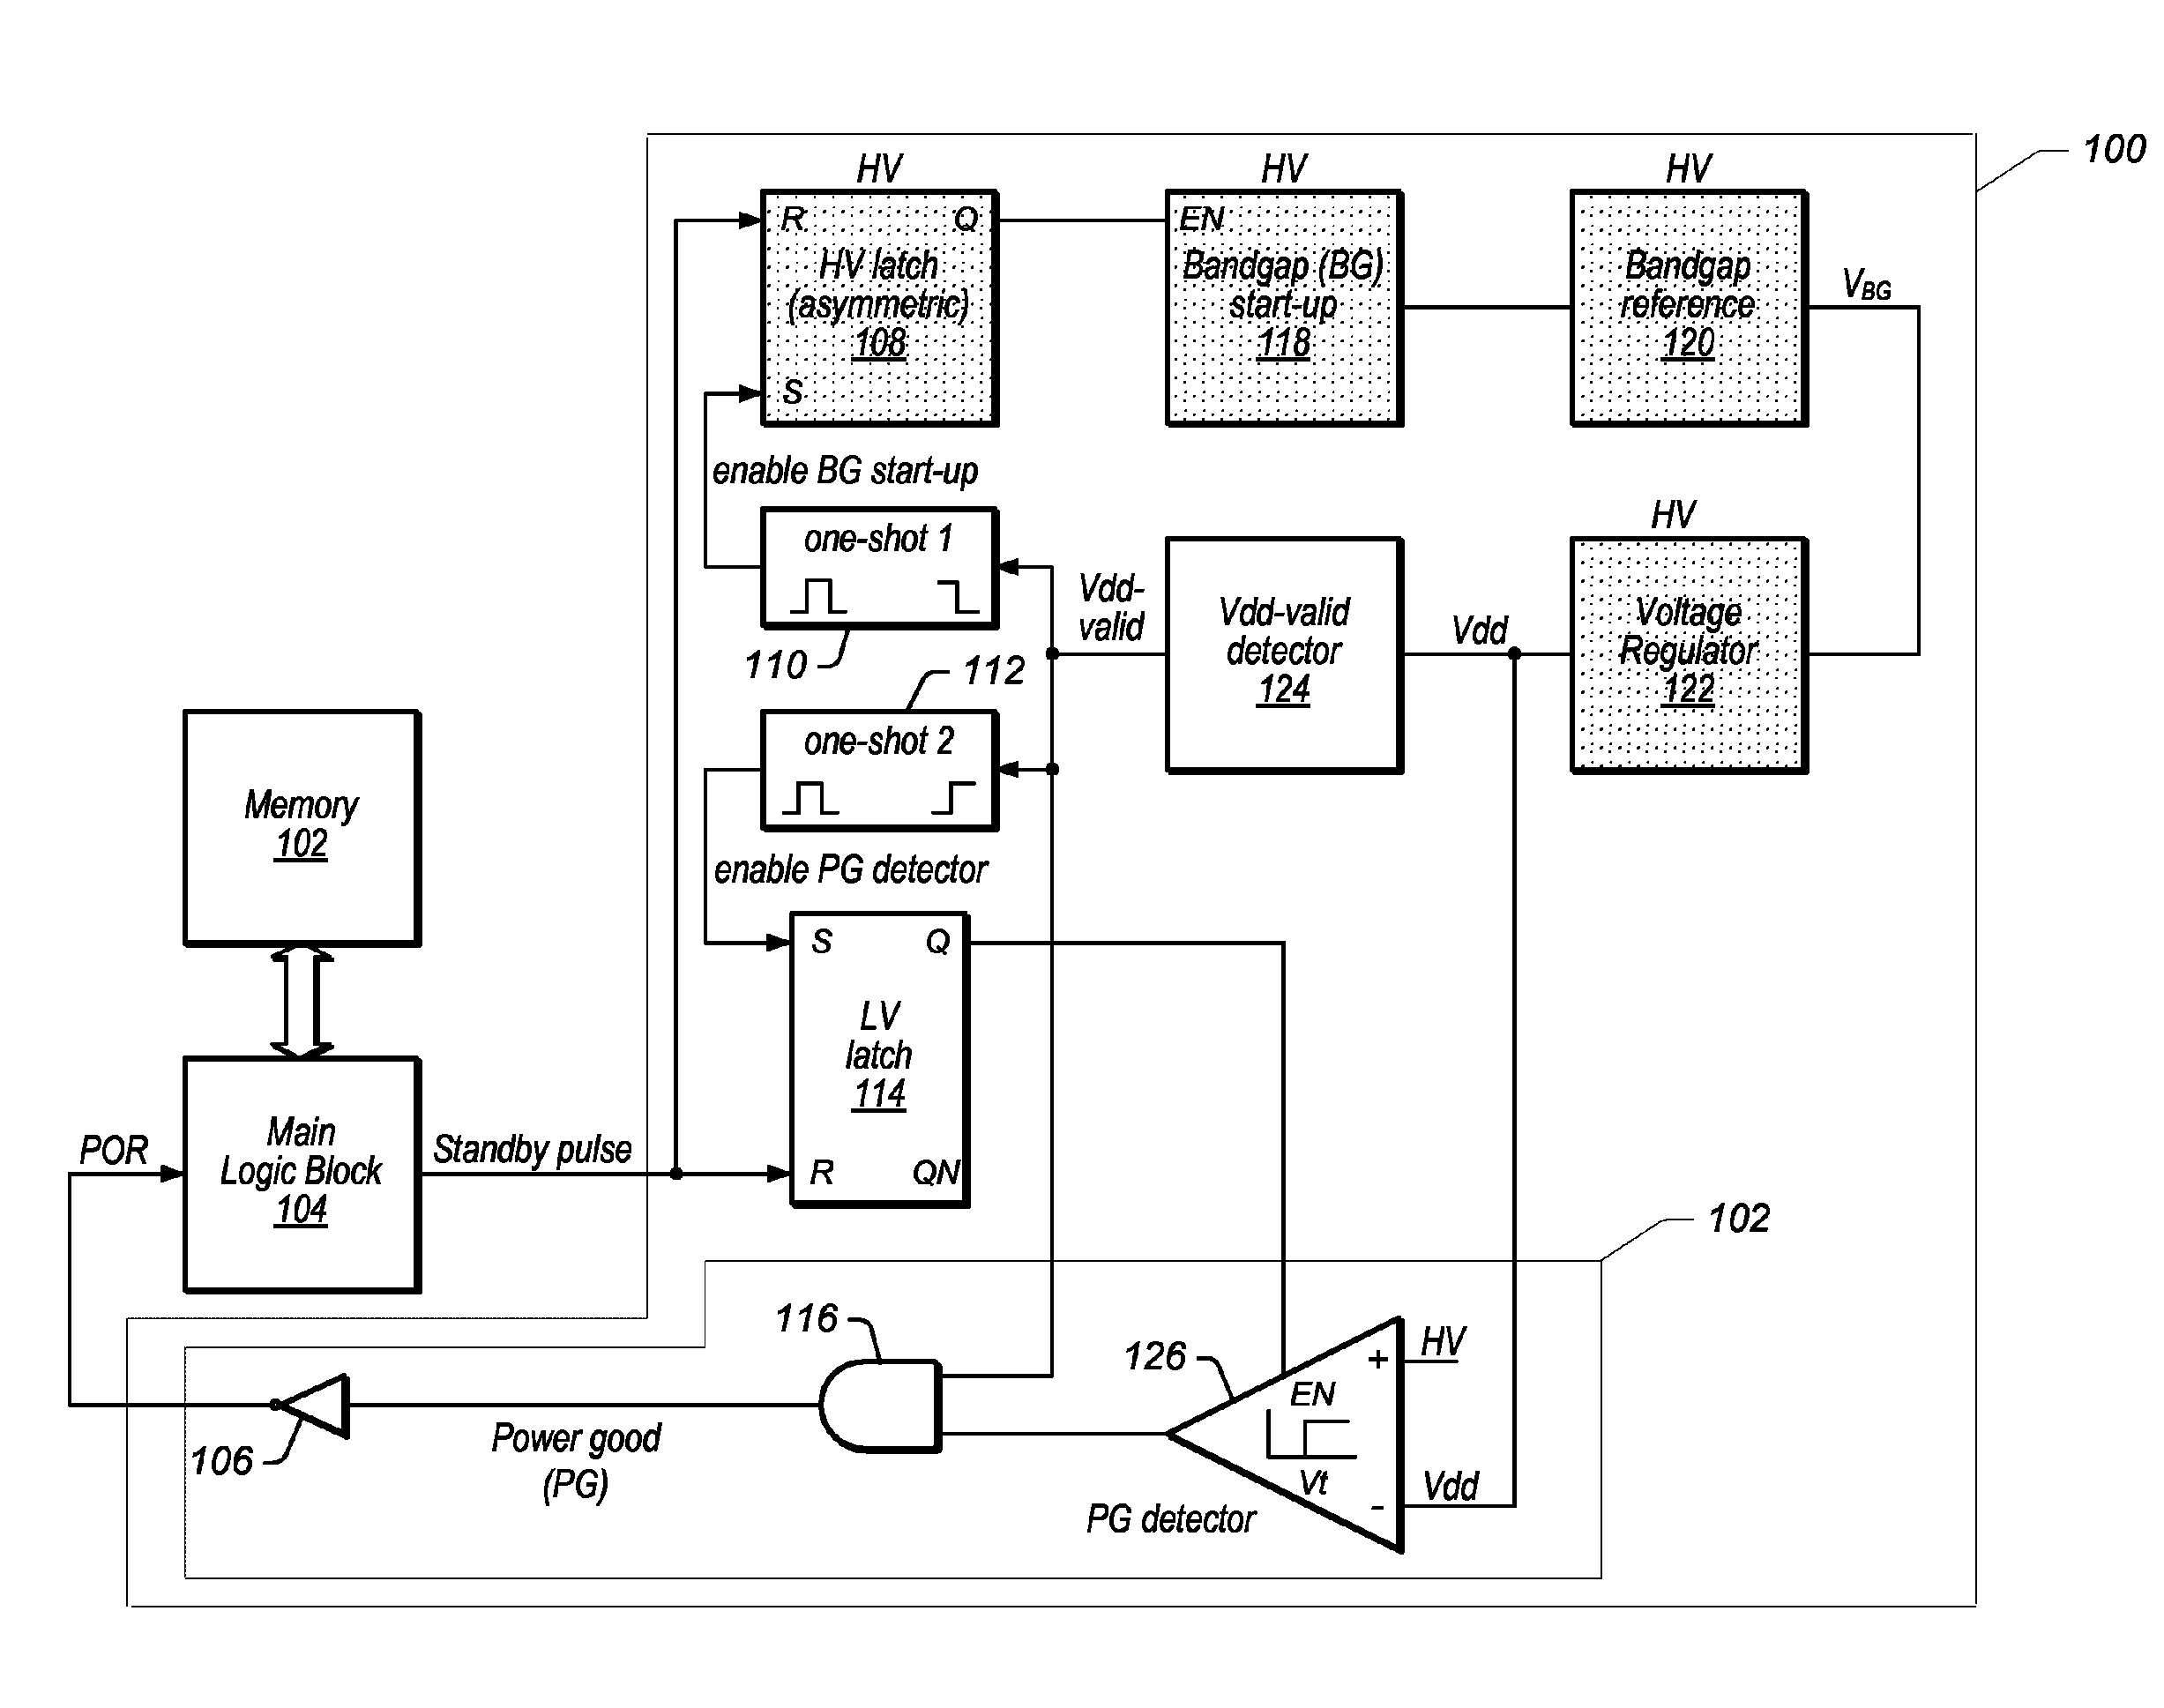 Power-up control for very low-power systems